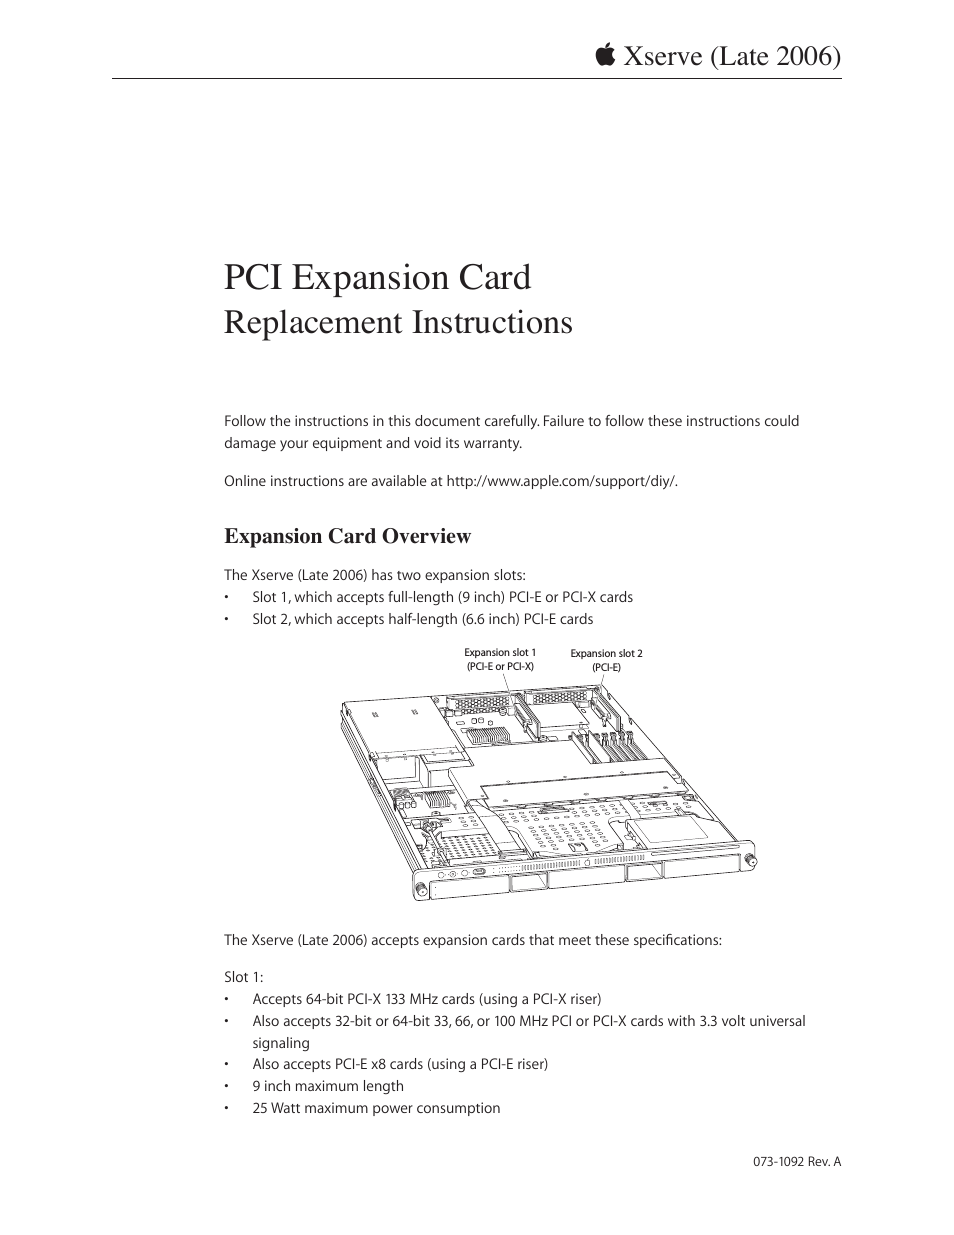 Xserve Intel (Late 2006) DIY Procedure for Expansion Card